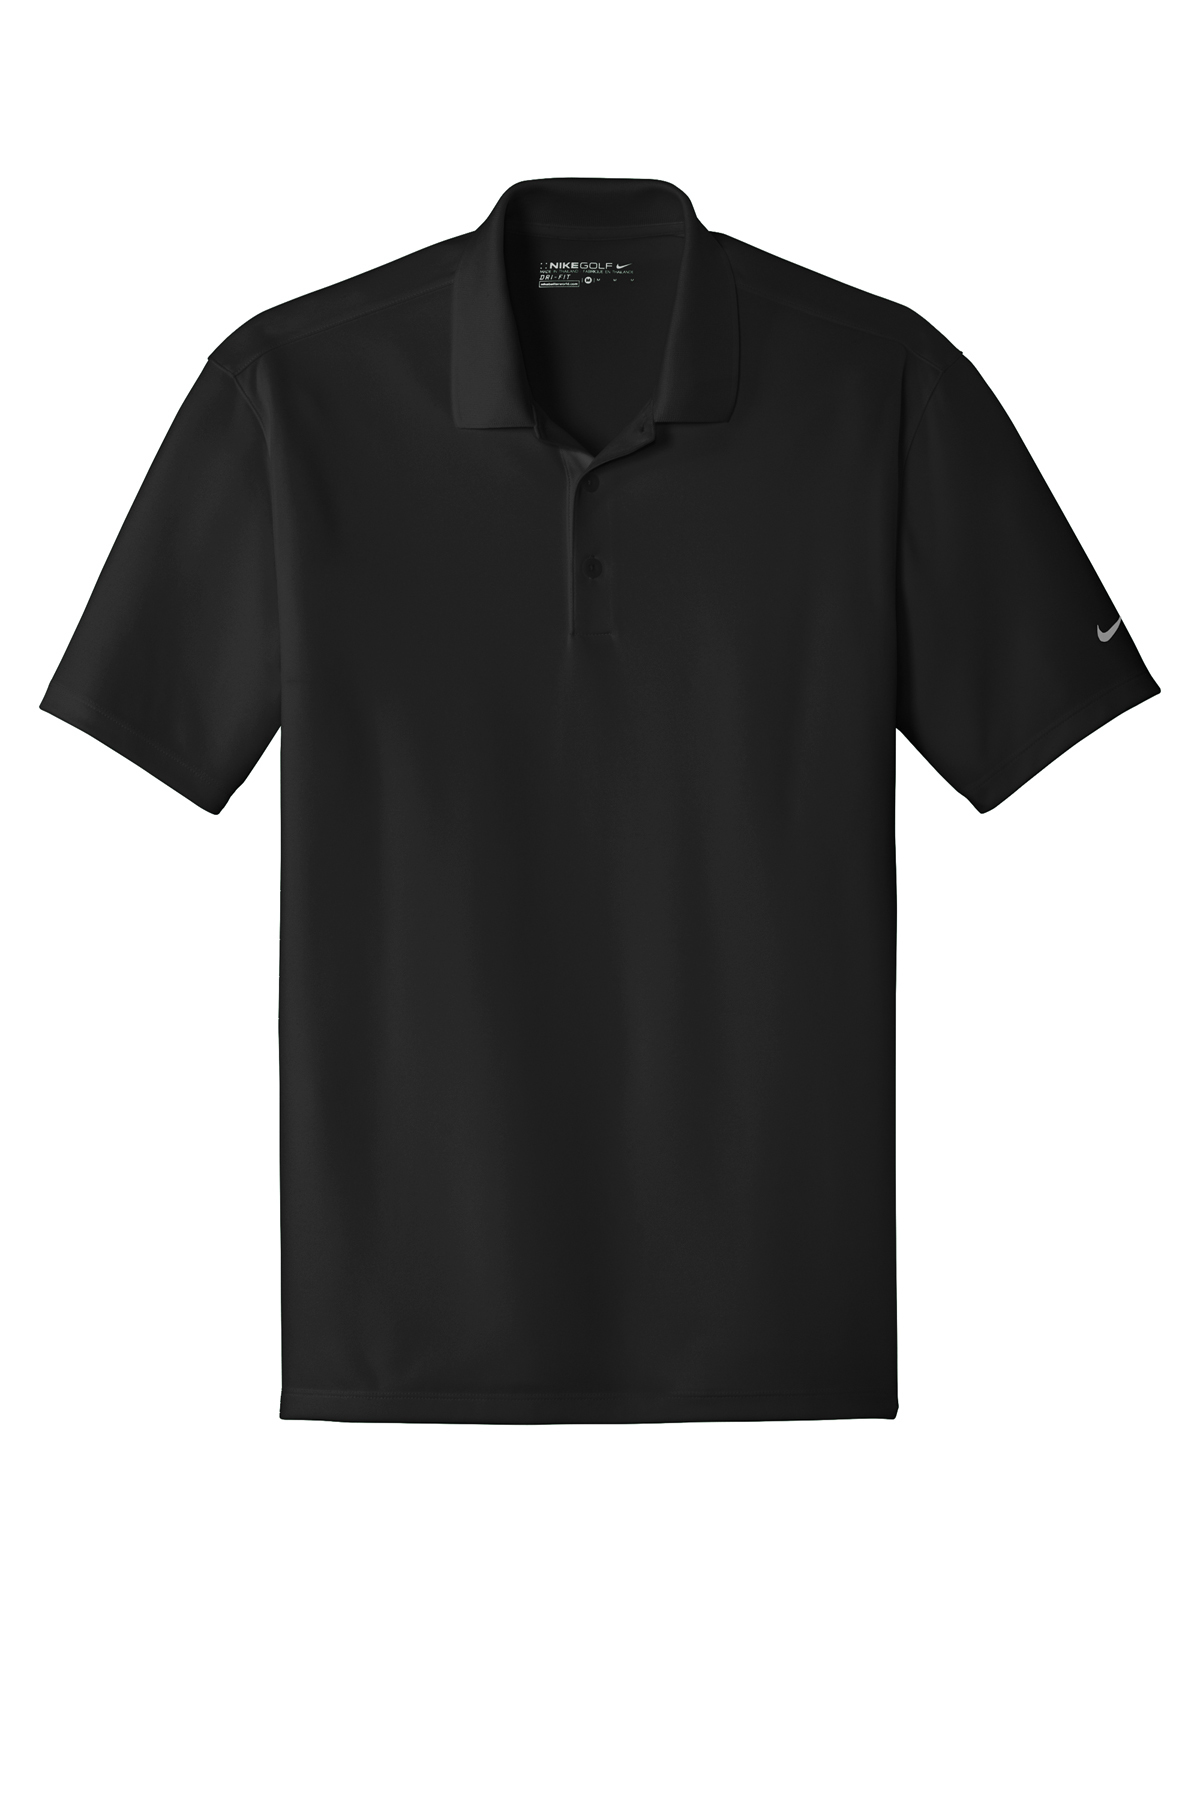 Nike Dri-FIT Classic Fit Players Polo with Flat Knit Collar | Product ...